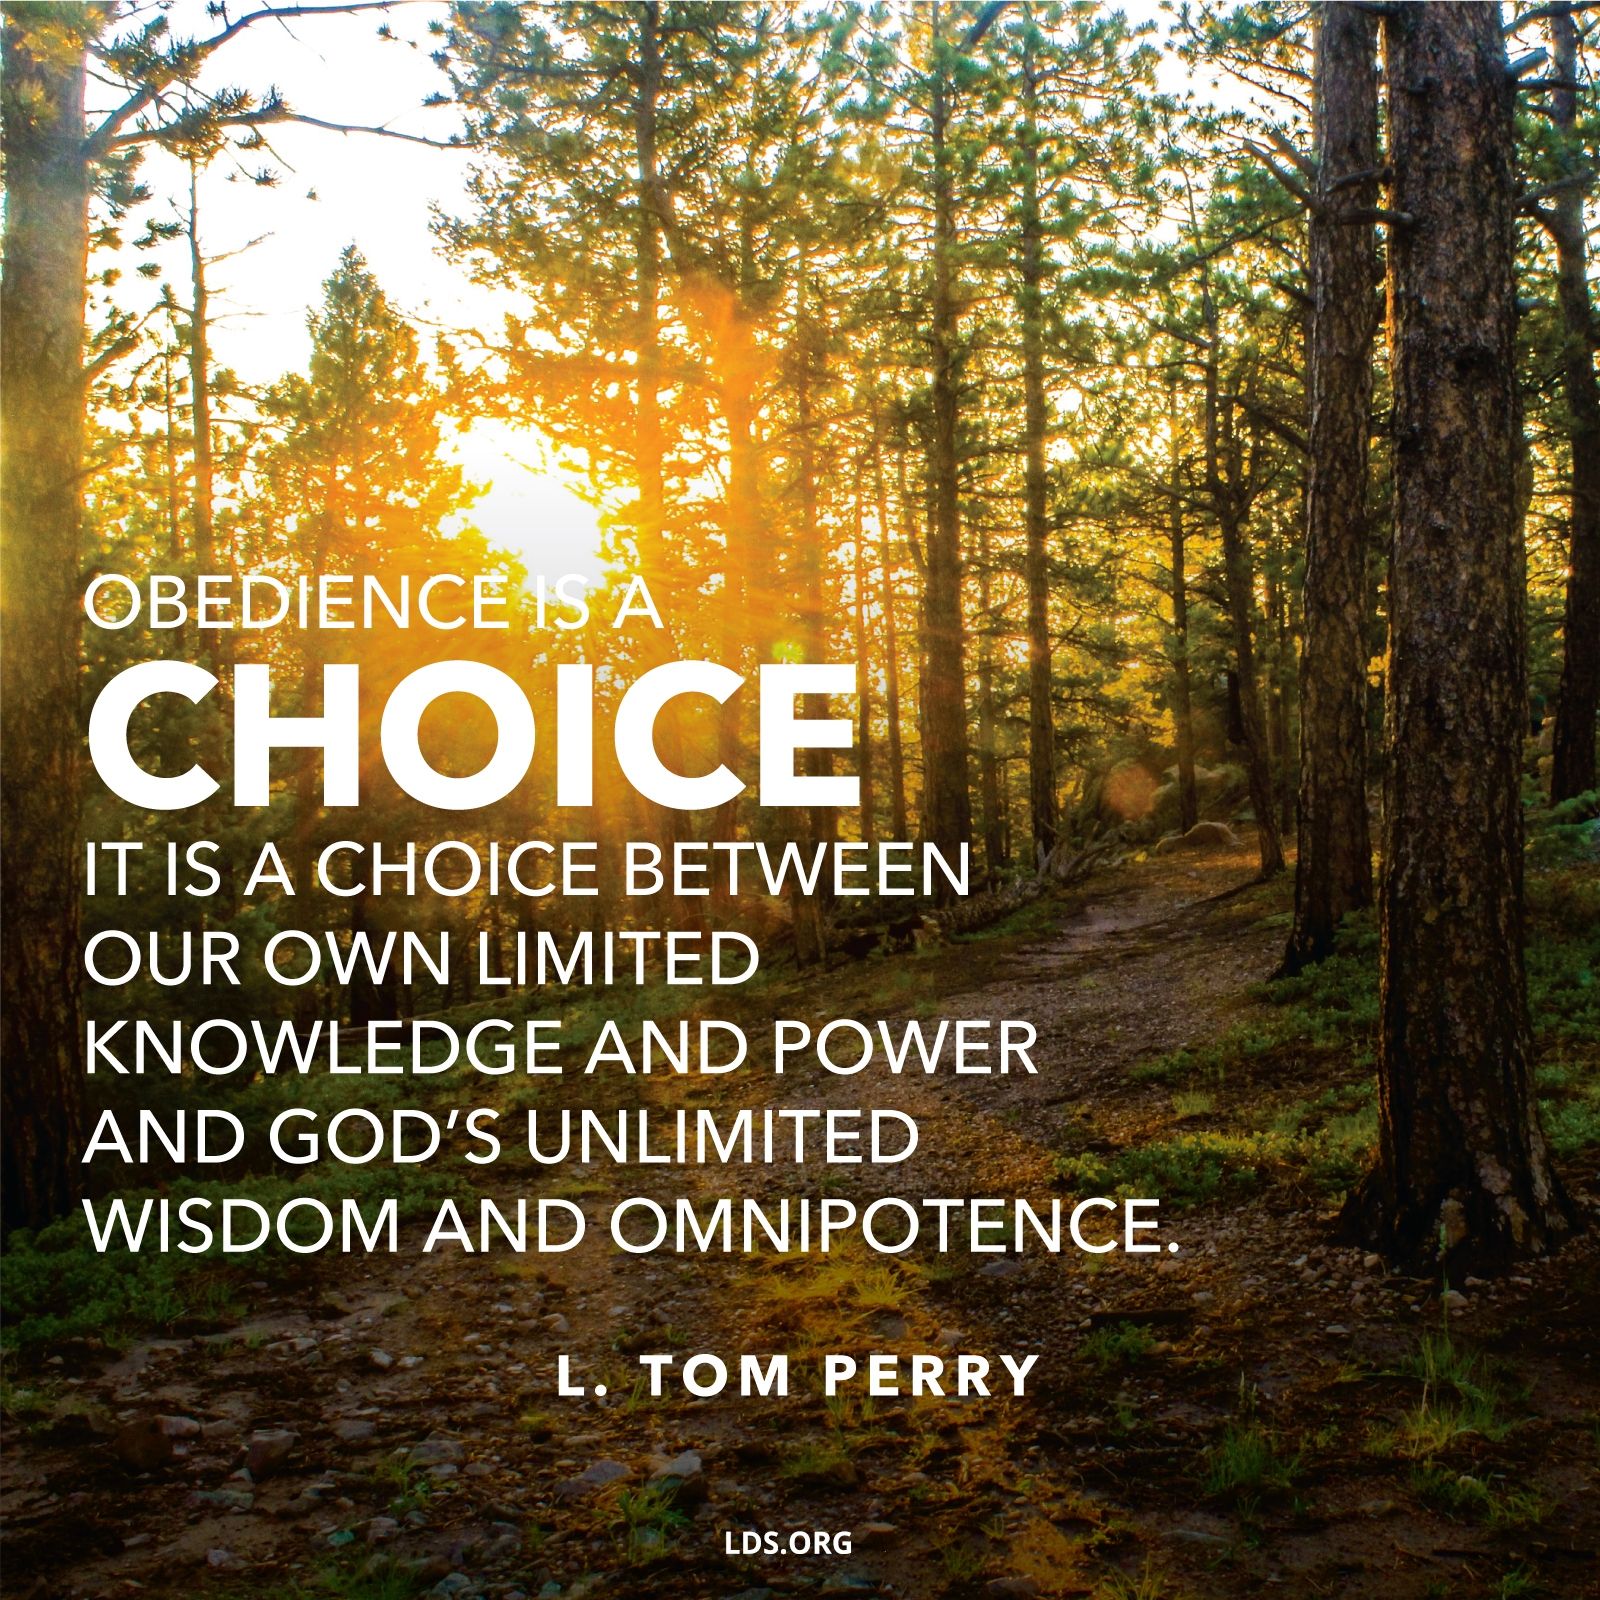 “Obedience is a choice. It is between our own limited knowledge and power and God’s unlimited wisdom and omnipotence.”—Elder L. Tom Perry, “Obedience through Our Faithfulness” © See Individual Images ipCode 1.